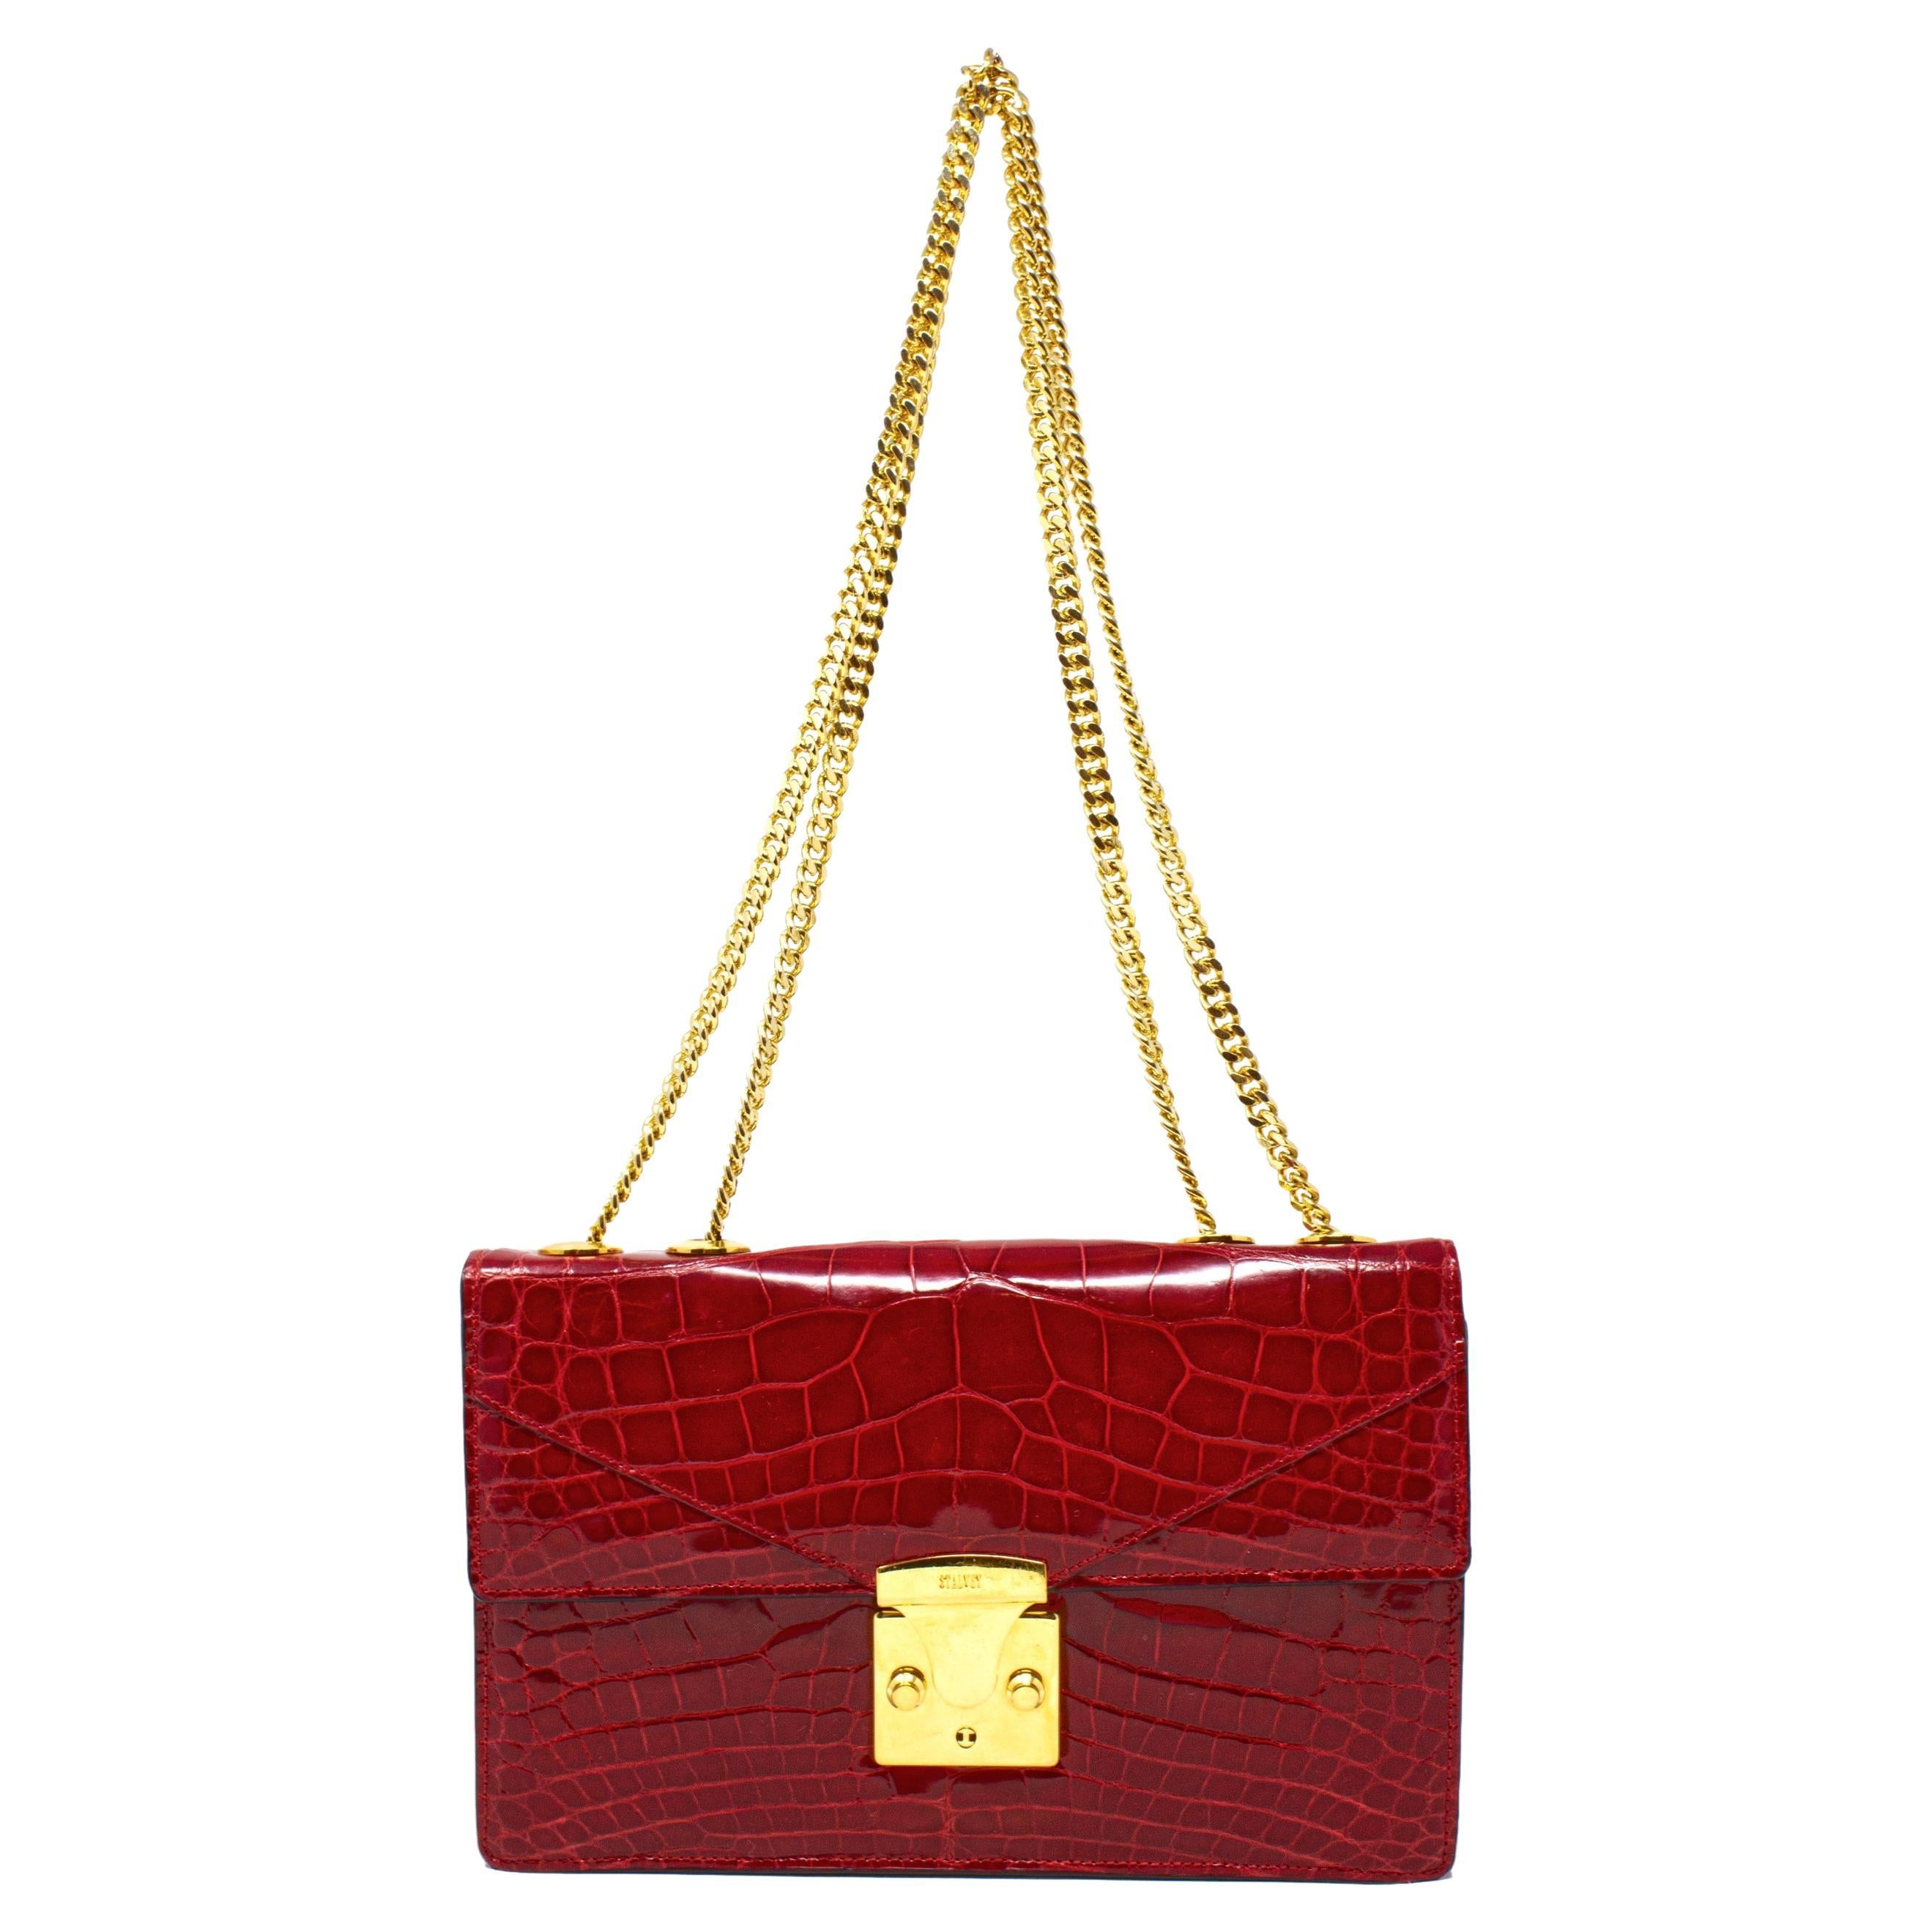 AUTHENTIC LOUIS VUITTON EPI LEATHER NEVERFULL MM BAG M40954 RED